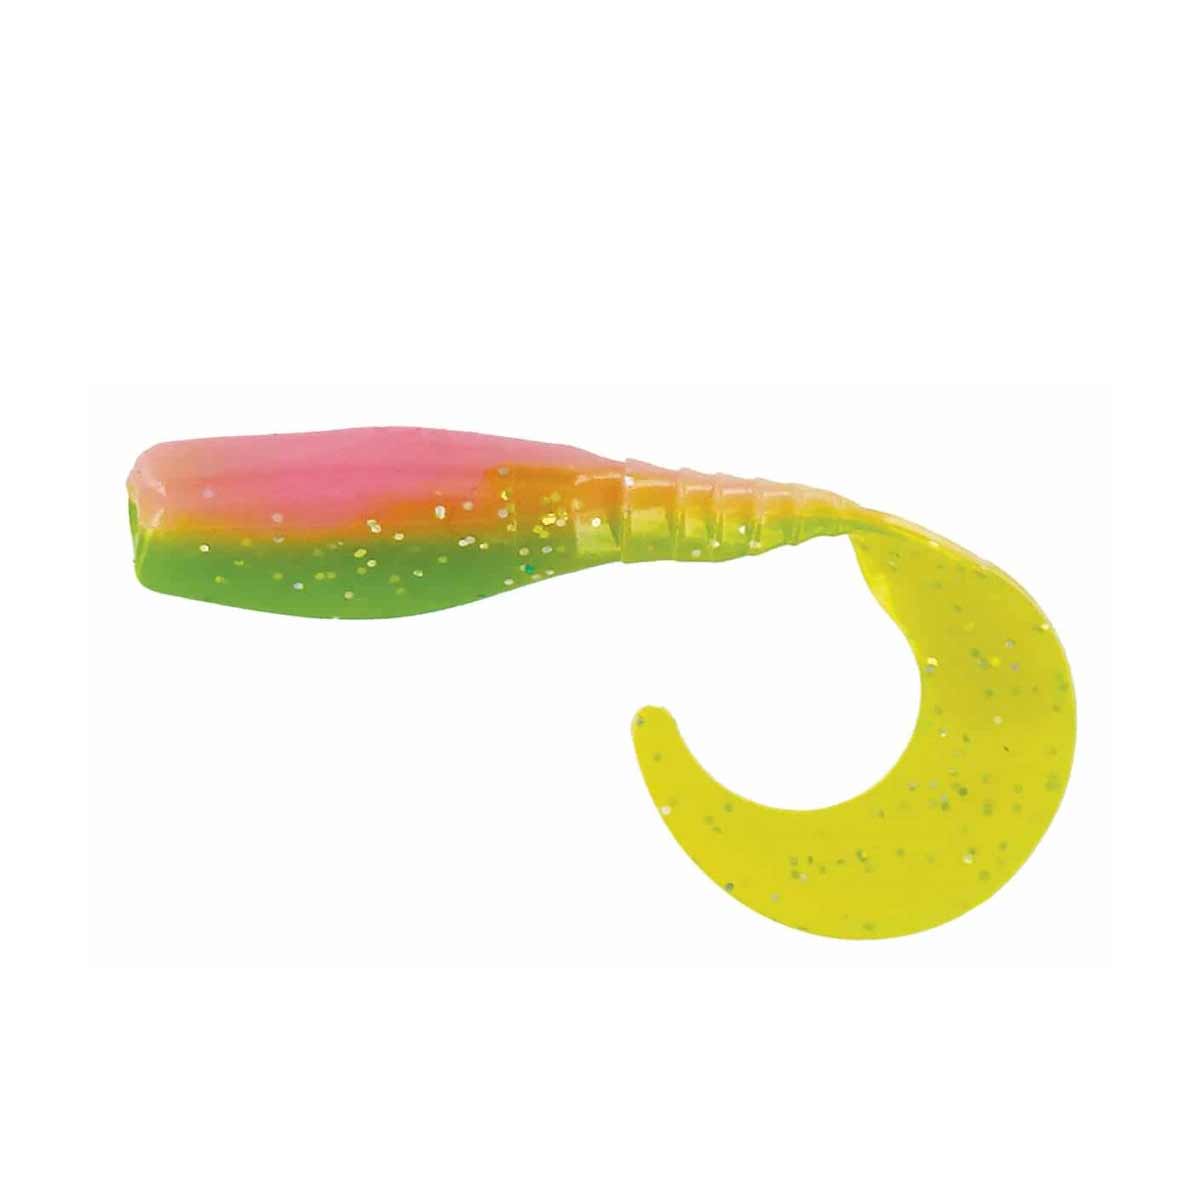 Curly Tail Crappie Minnow_Electric Chicken Glo